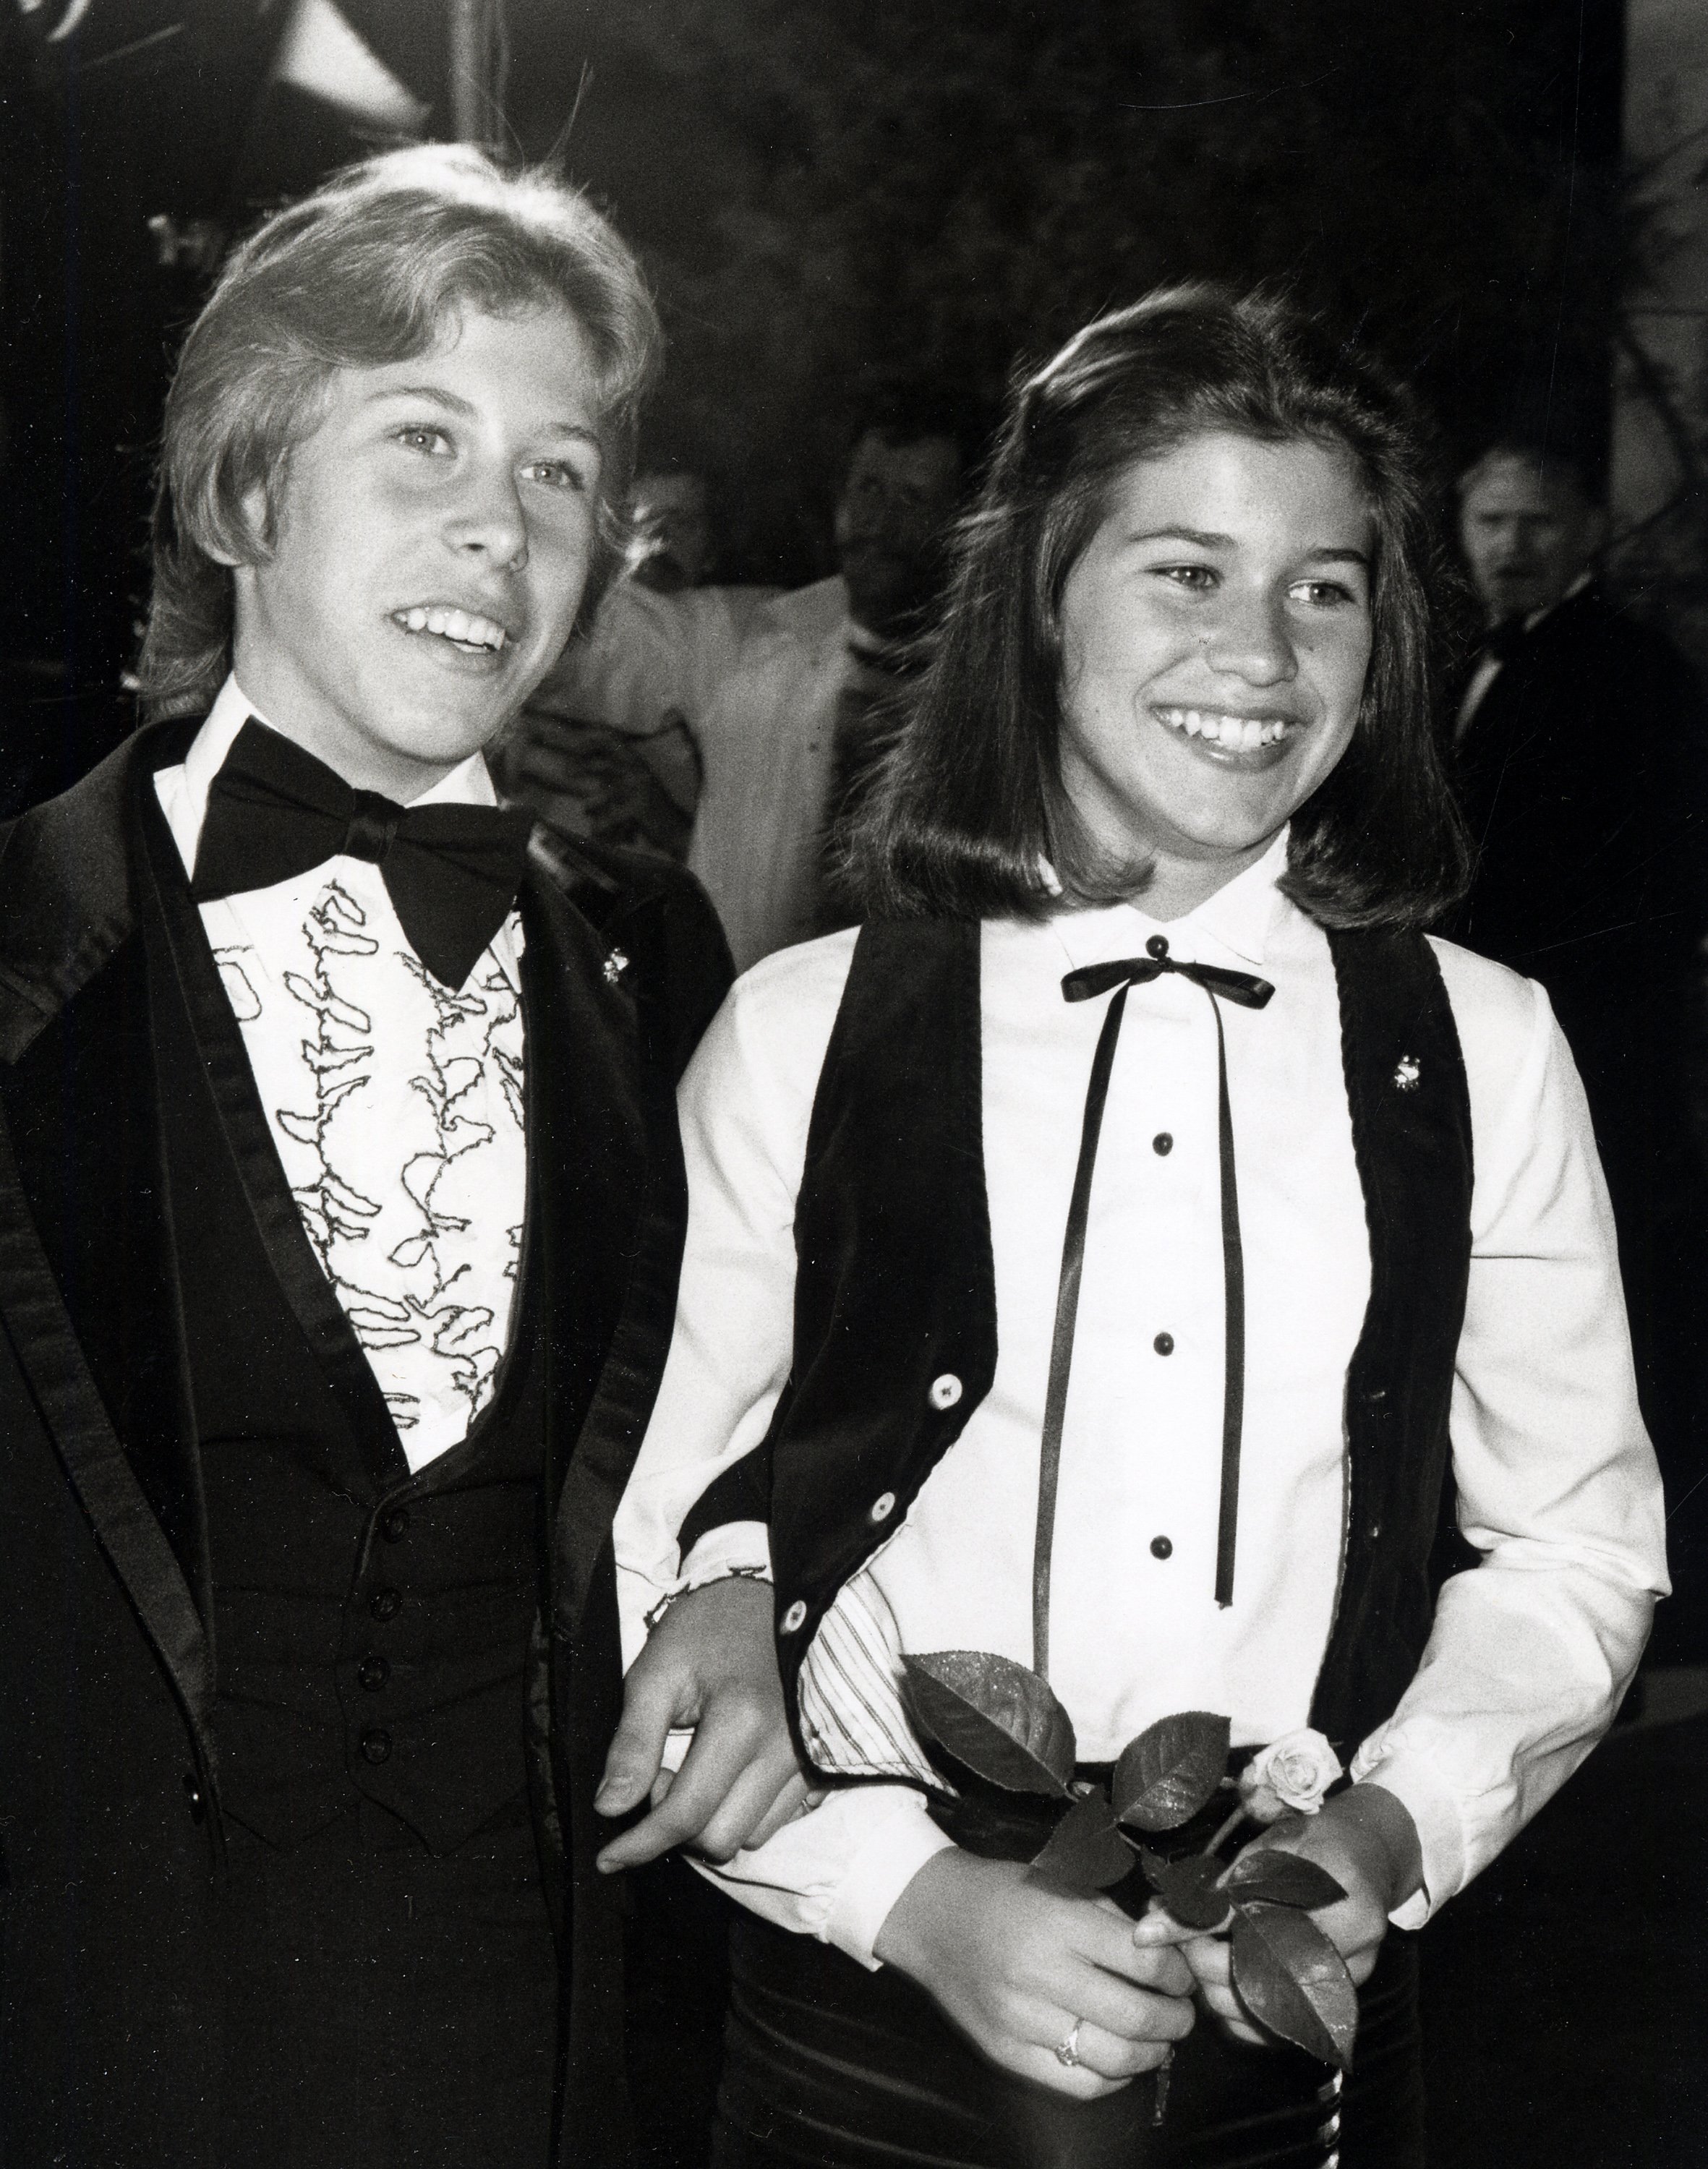 Actress Nancy McKeon and actor Phillip McKeon attending the premiere party for "The Muppets Go Hollywood" on April 6, 1979 at the Coconut Grove at the Ambassador Hotel in Los Angeles, California. | Source: Getty Images